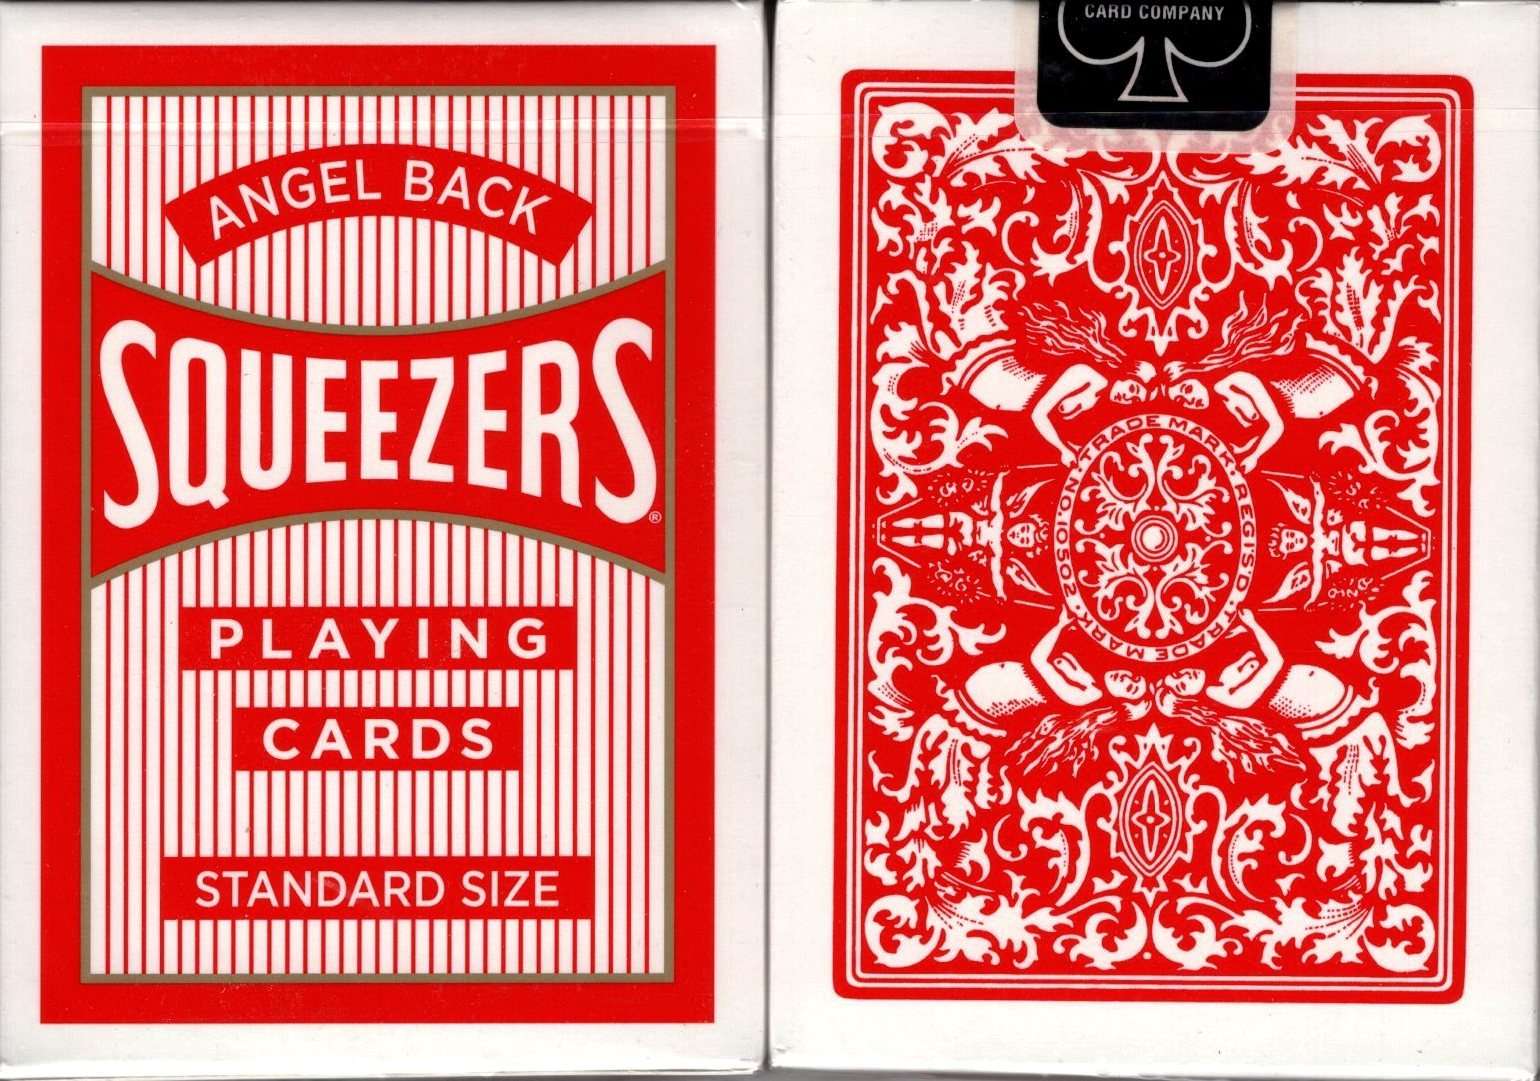 Angel Back Squeezers Playing Cards USPCC